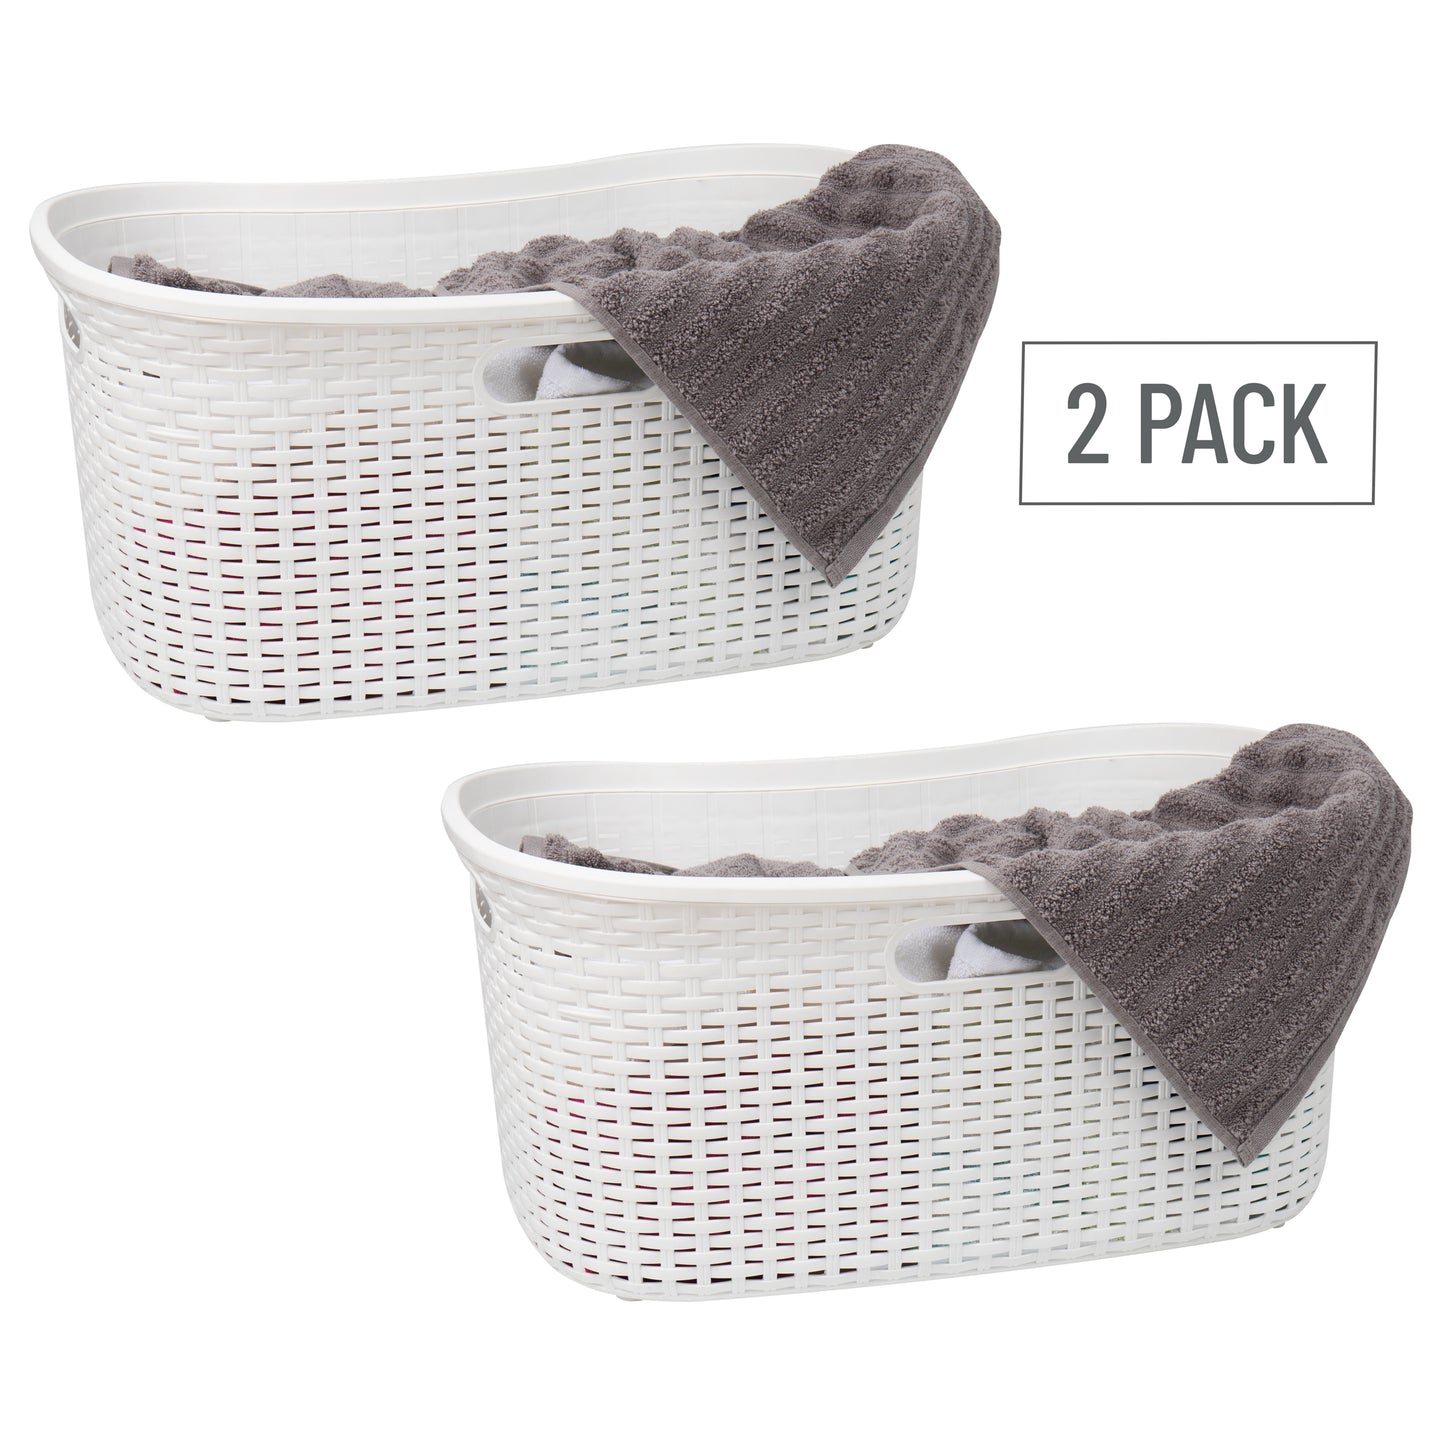 Mind Reader Basket Collection, Laundry Basket, 40 Liter (10kg/22lbs) Capacity, Premium Wicker Look, Cut Out Handles, Ventilated